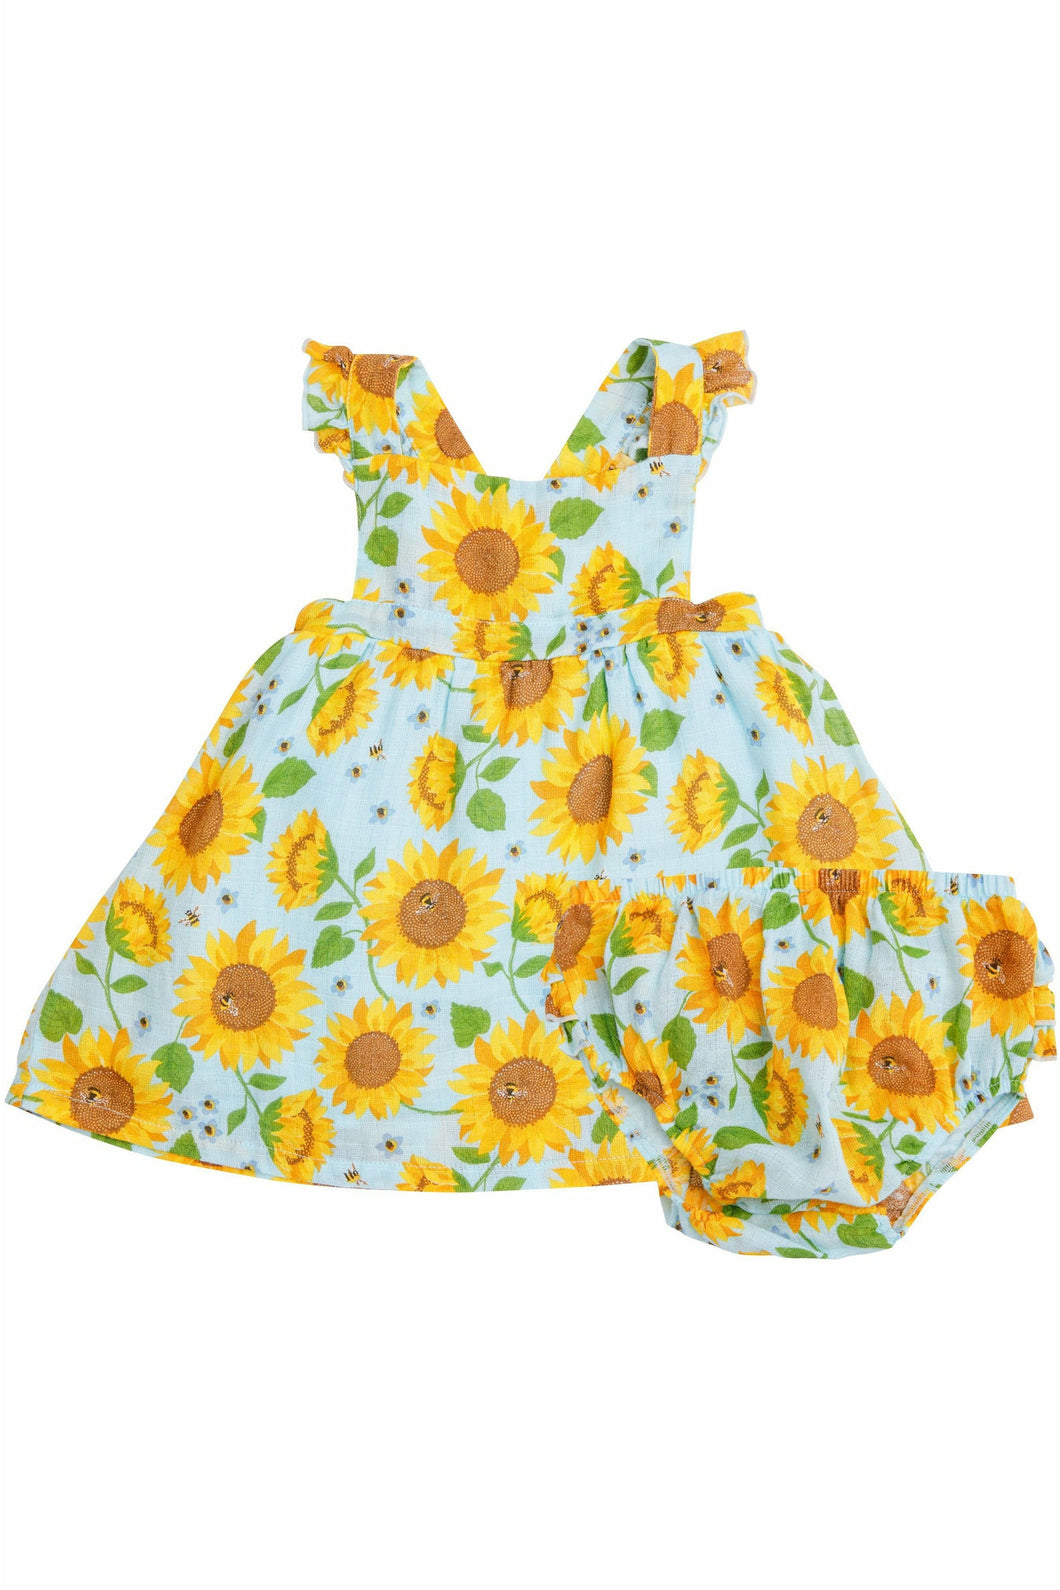 SL SUNFLOWERS PINAFORE TOP/BLMR SET